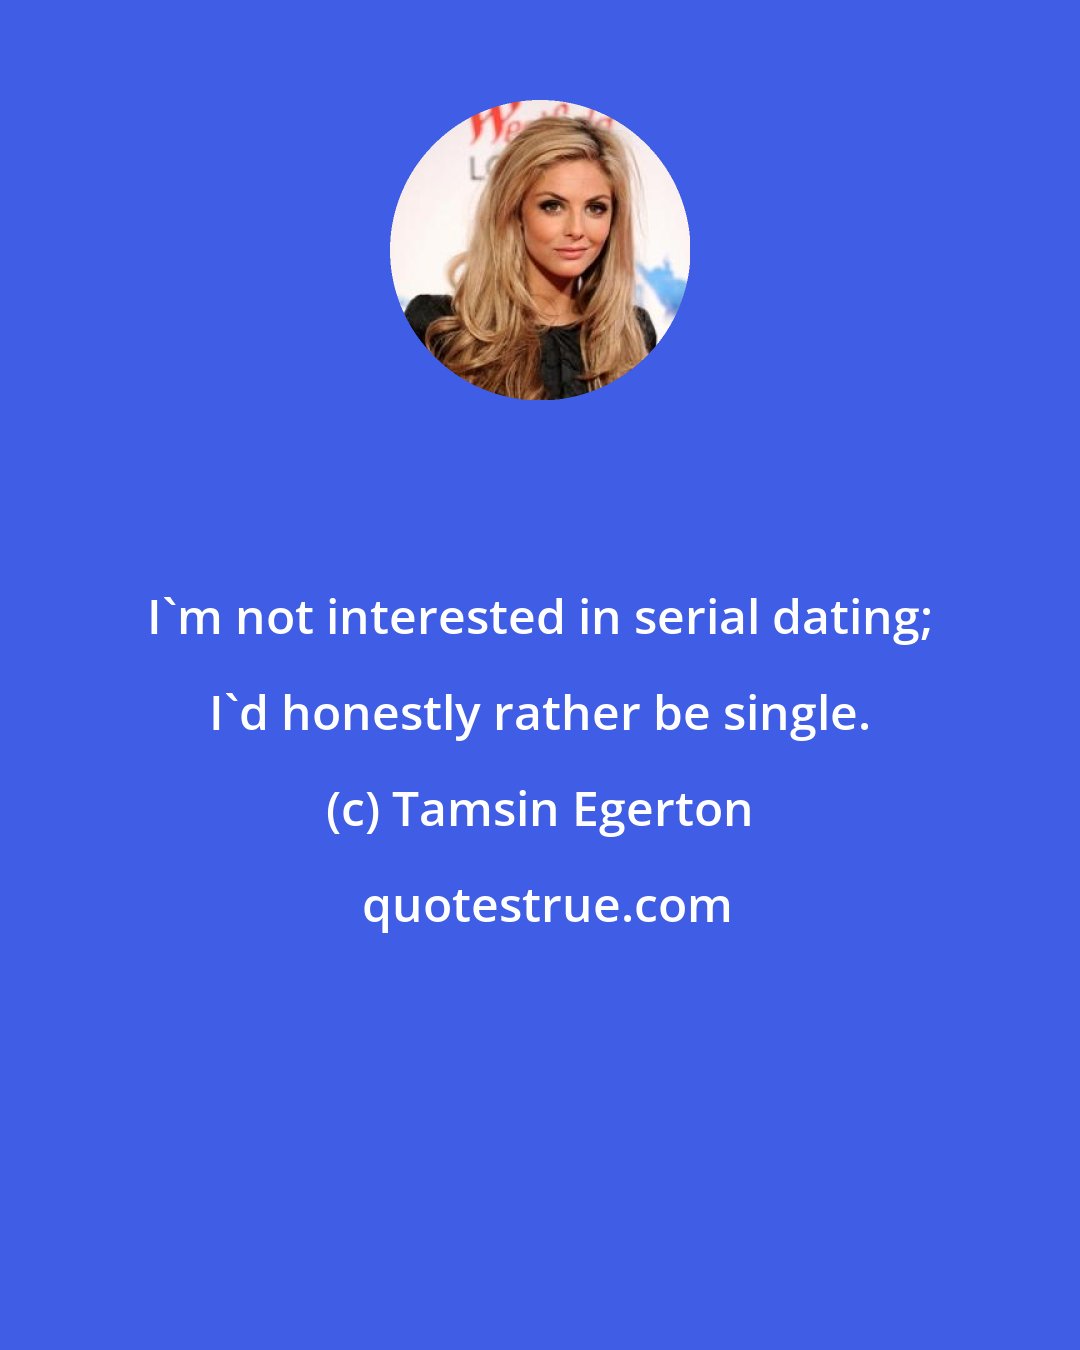 Tamsin Egerton: I'm not interested in serial dating; I'd honestly rather be single.